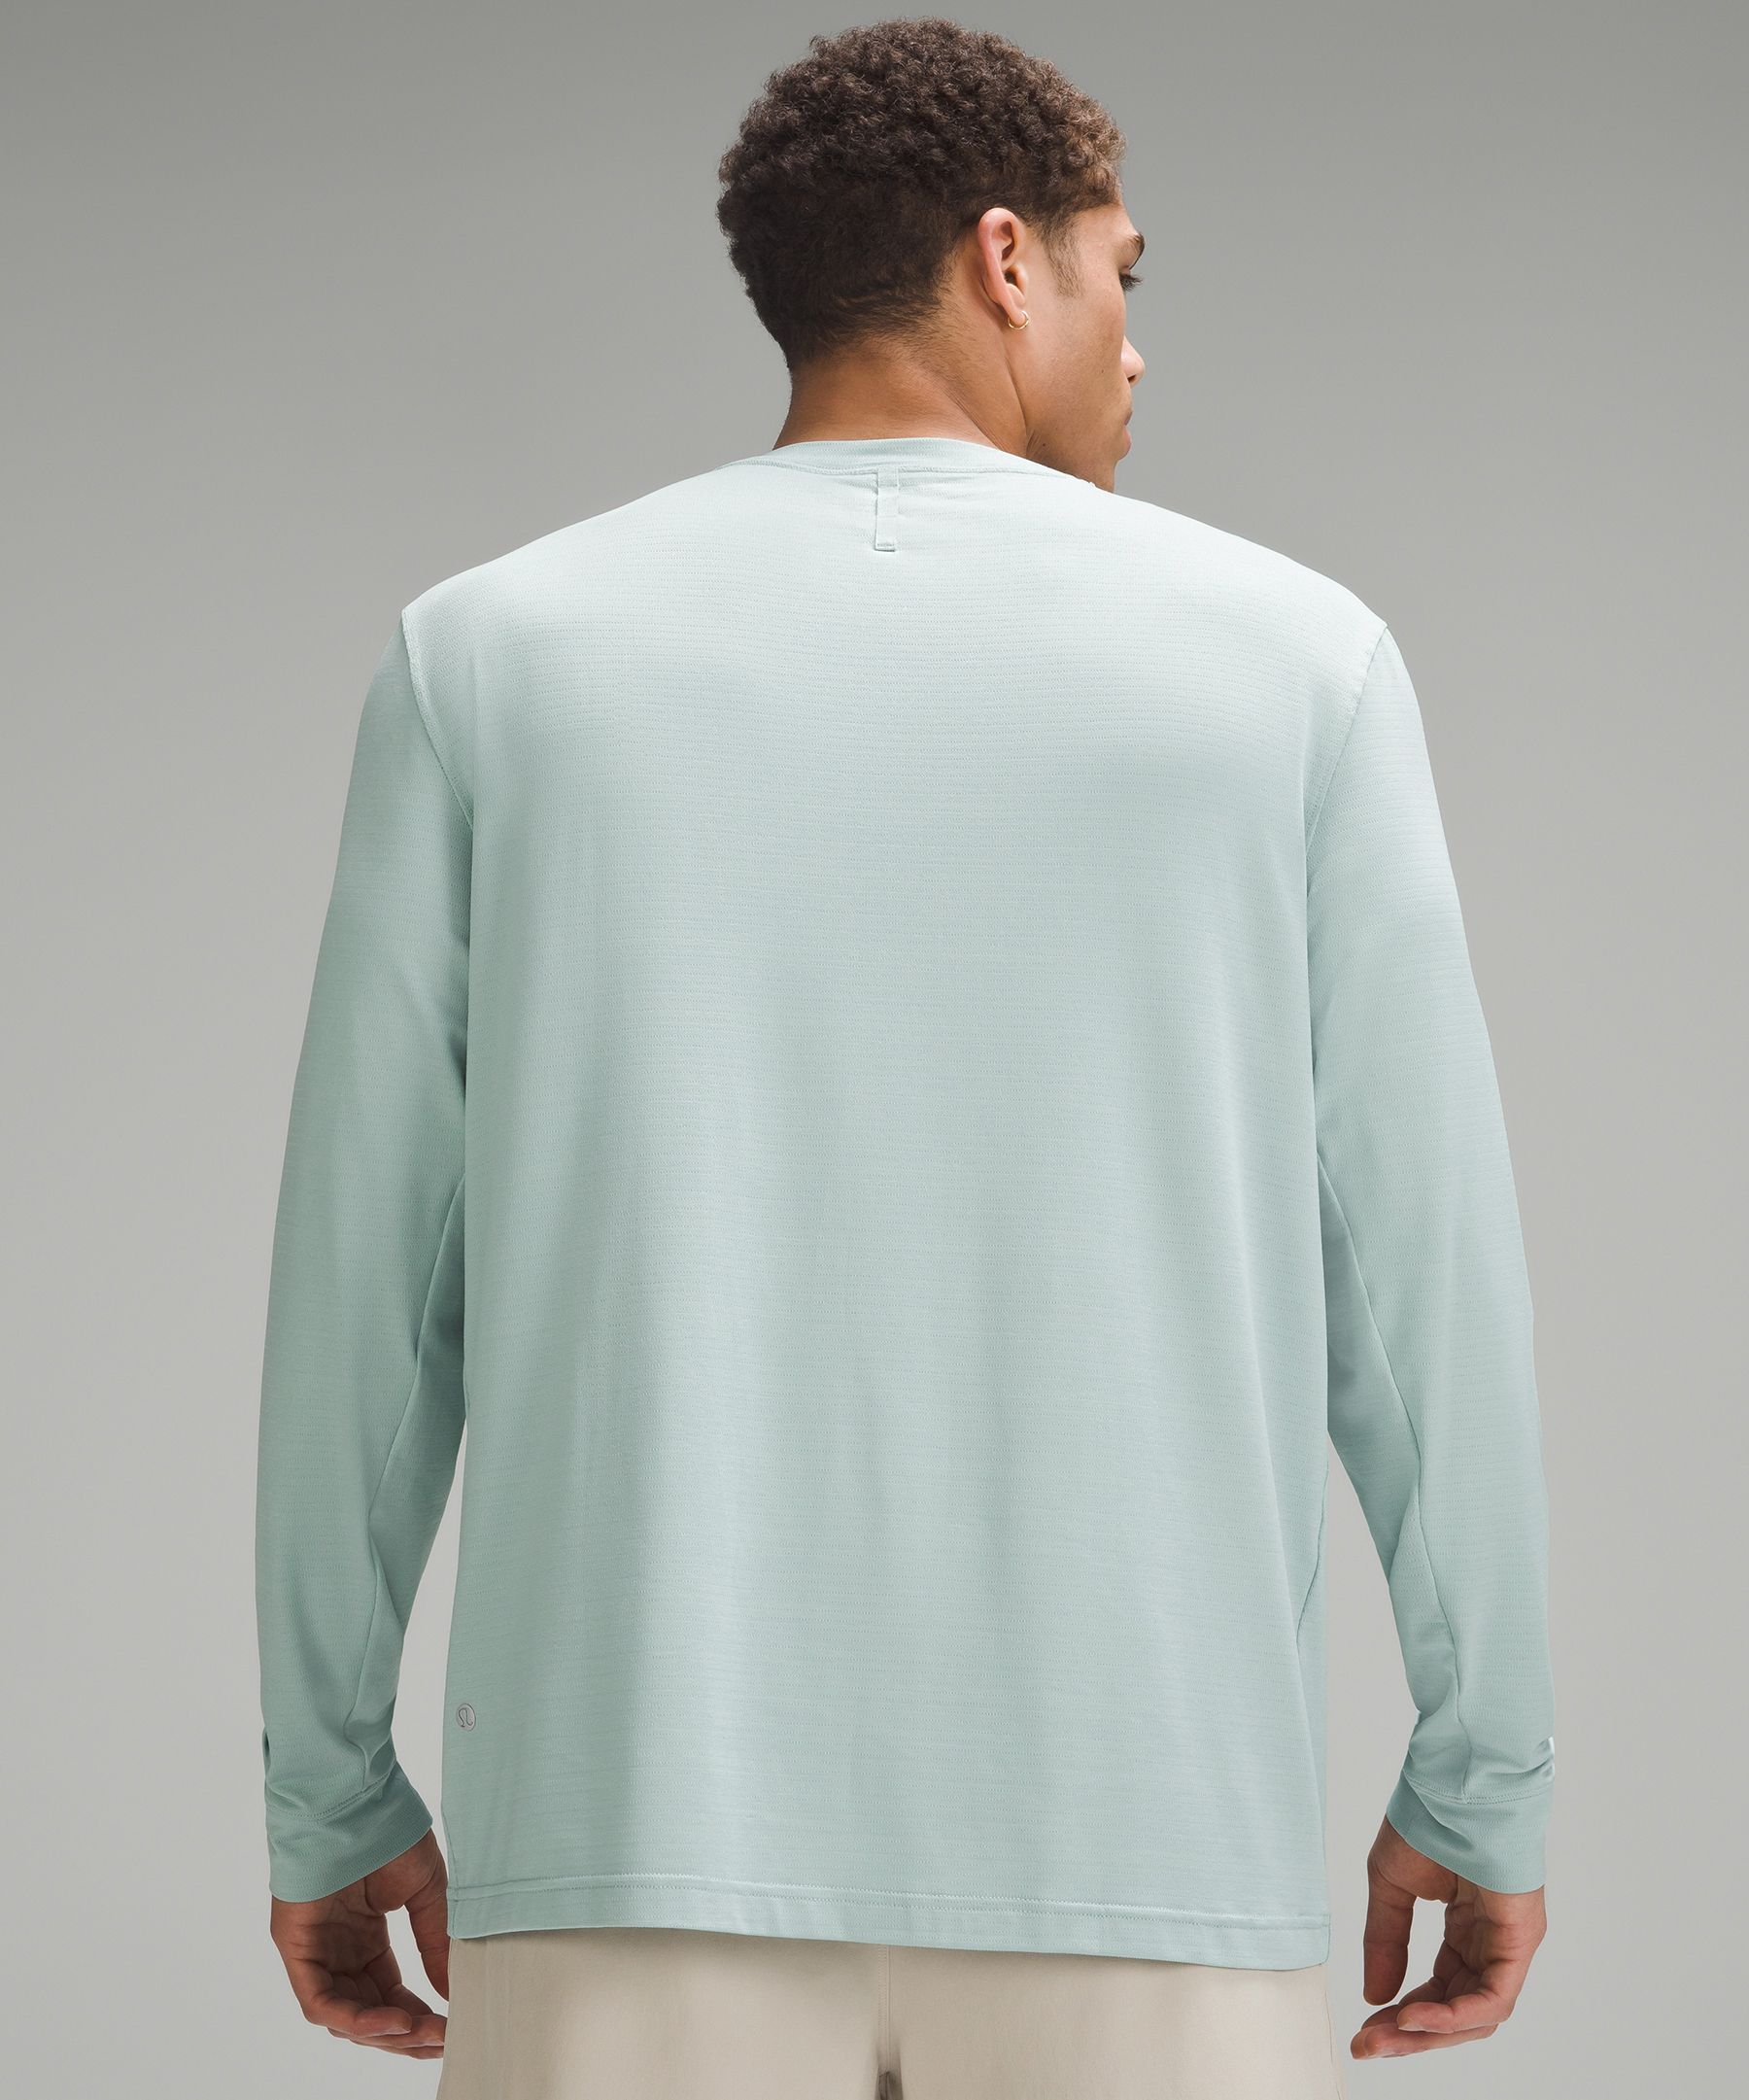 License to Train Relaxed-Fit Long-Sleeve Shirt | Men's Long Sleeve Shirts